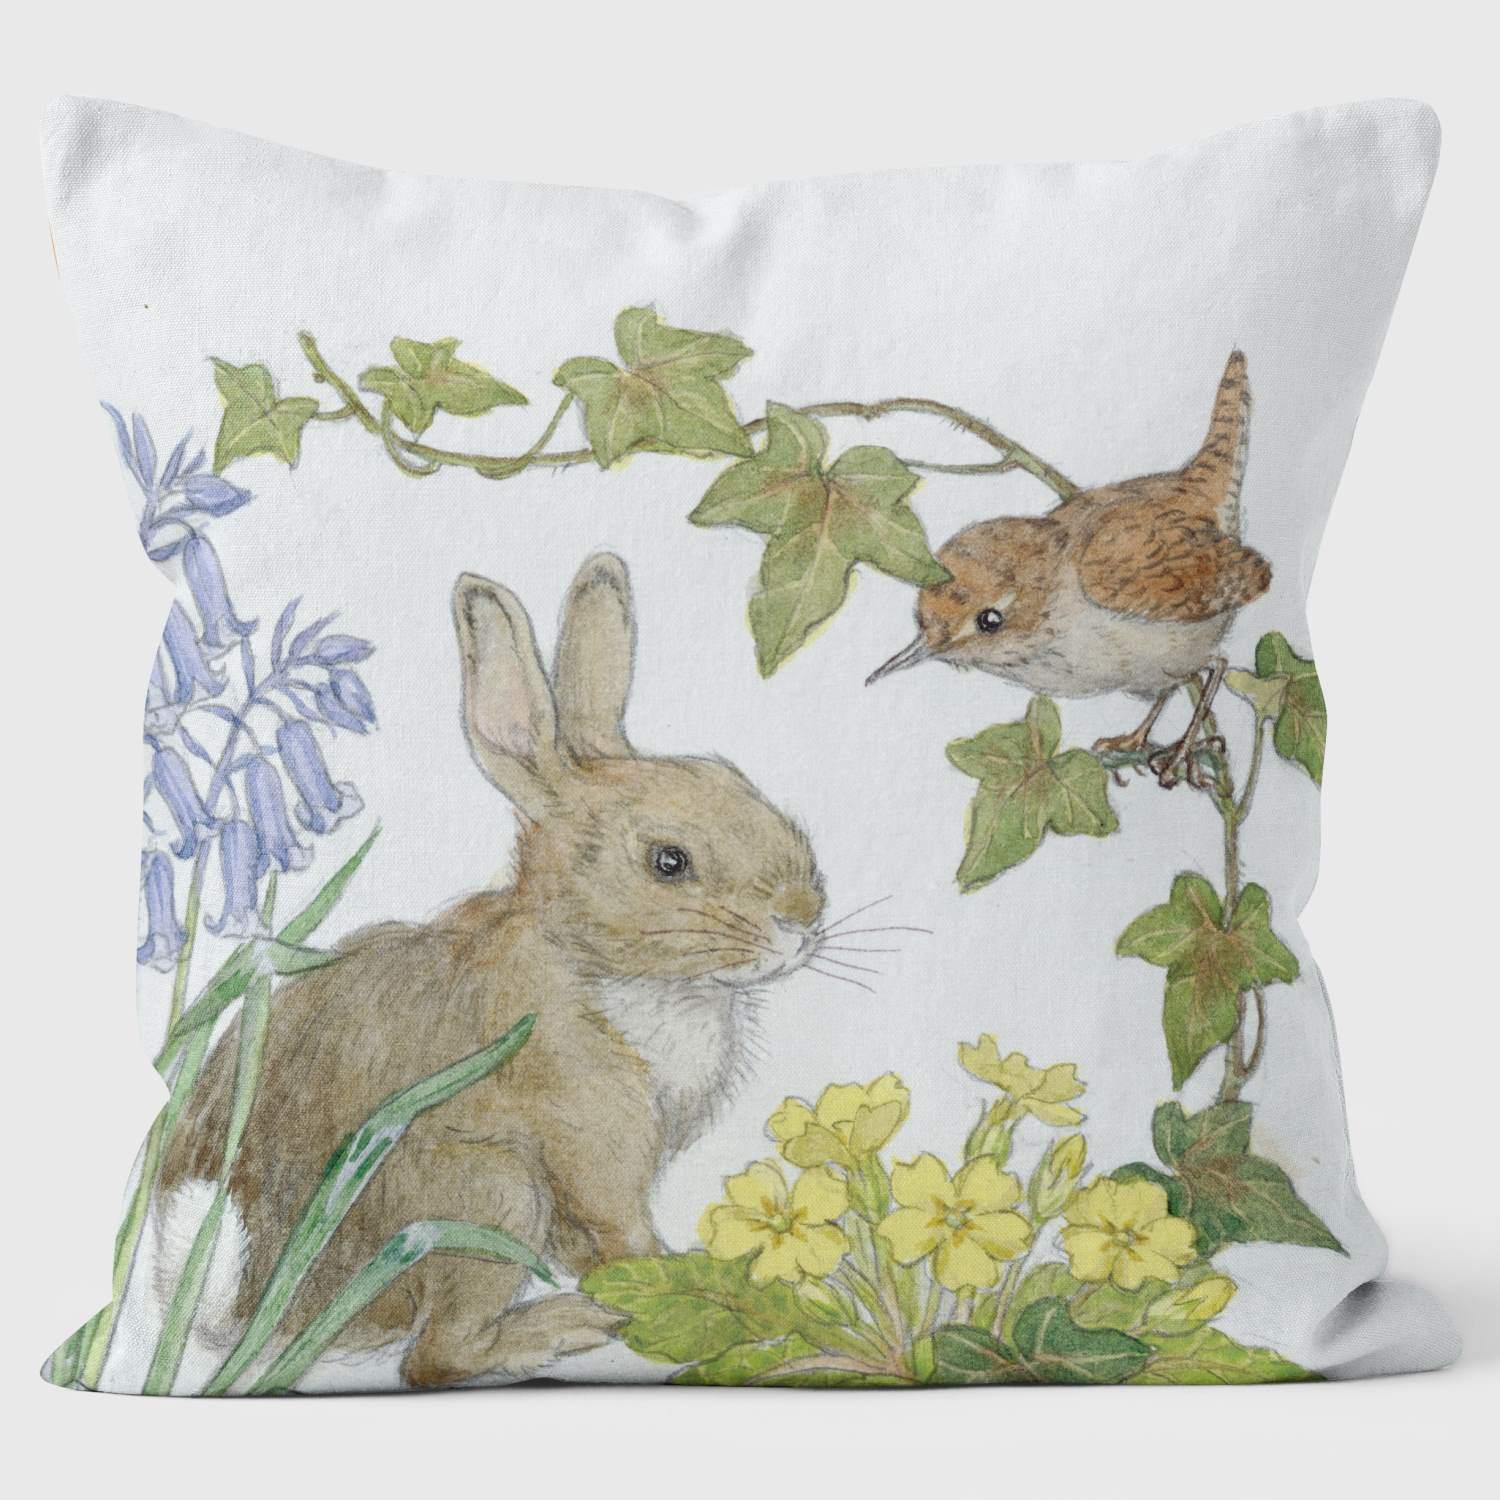 Rabbit and Wren - Special Occasions Cushion - Handmade Cushions UK - WeLoveCushions